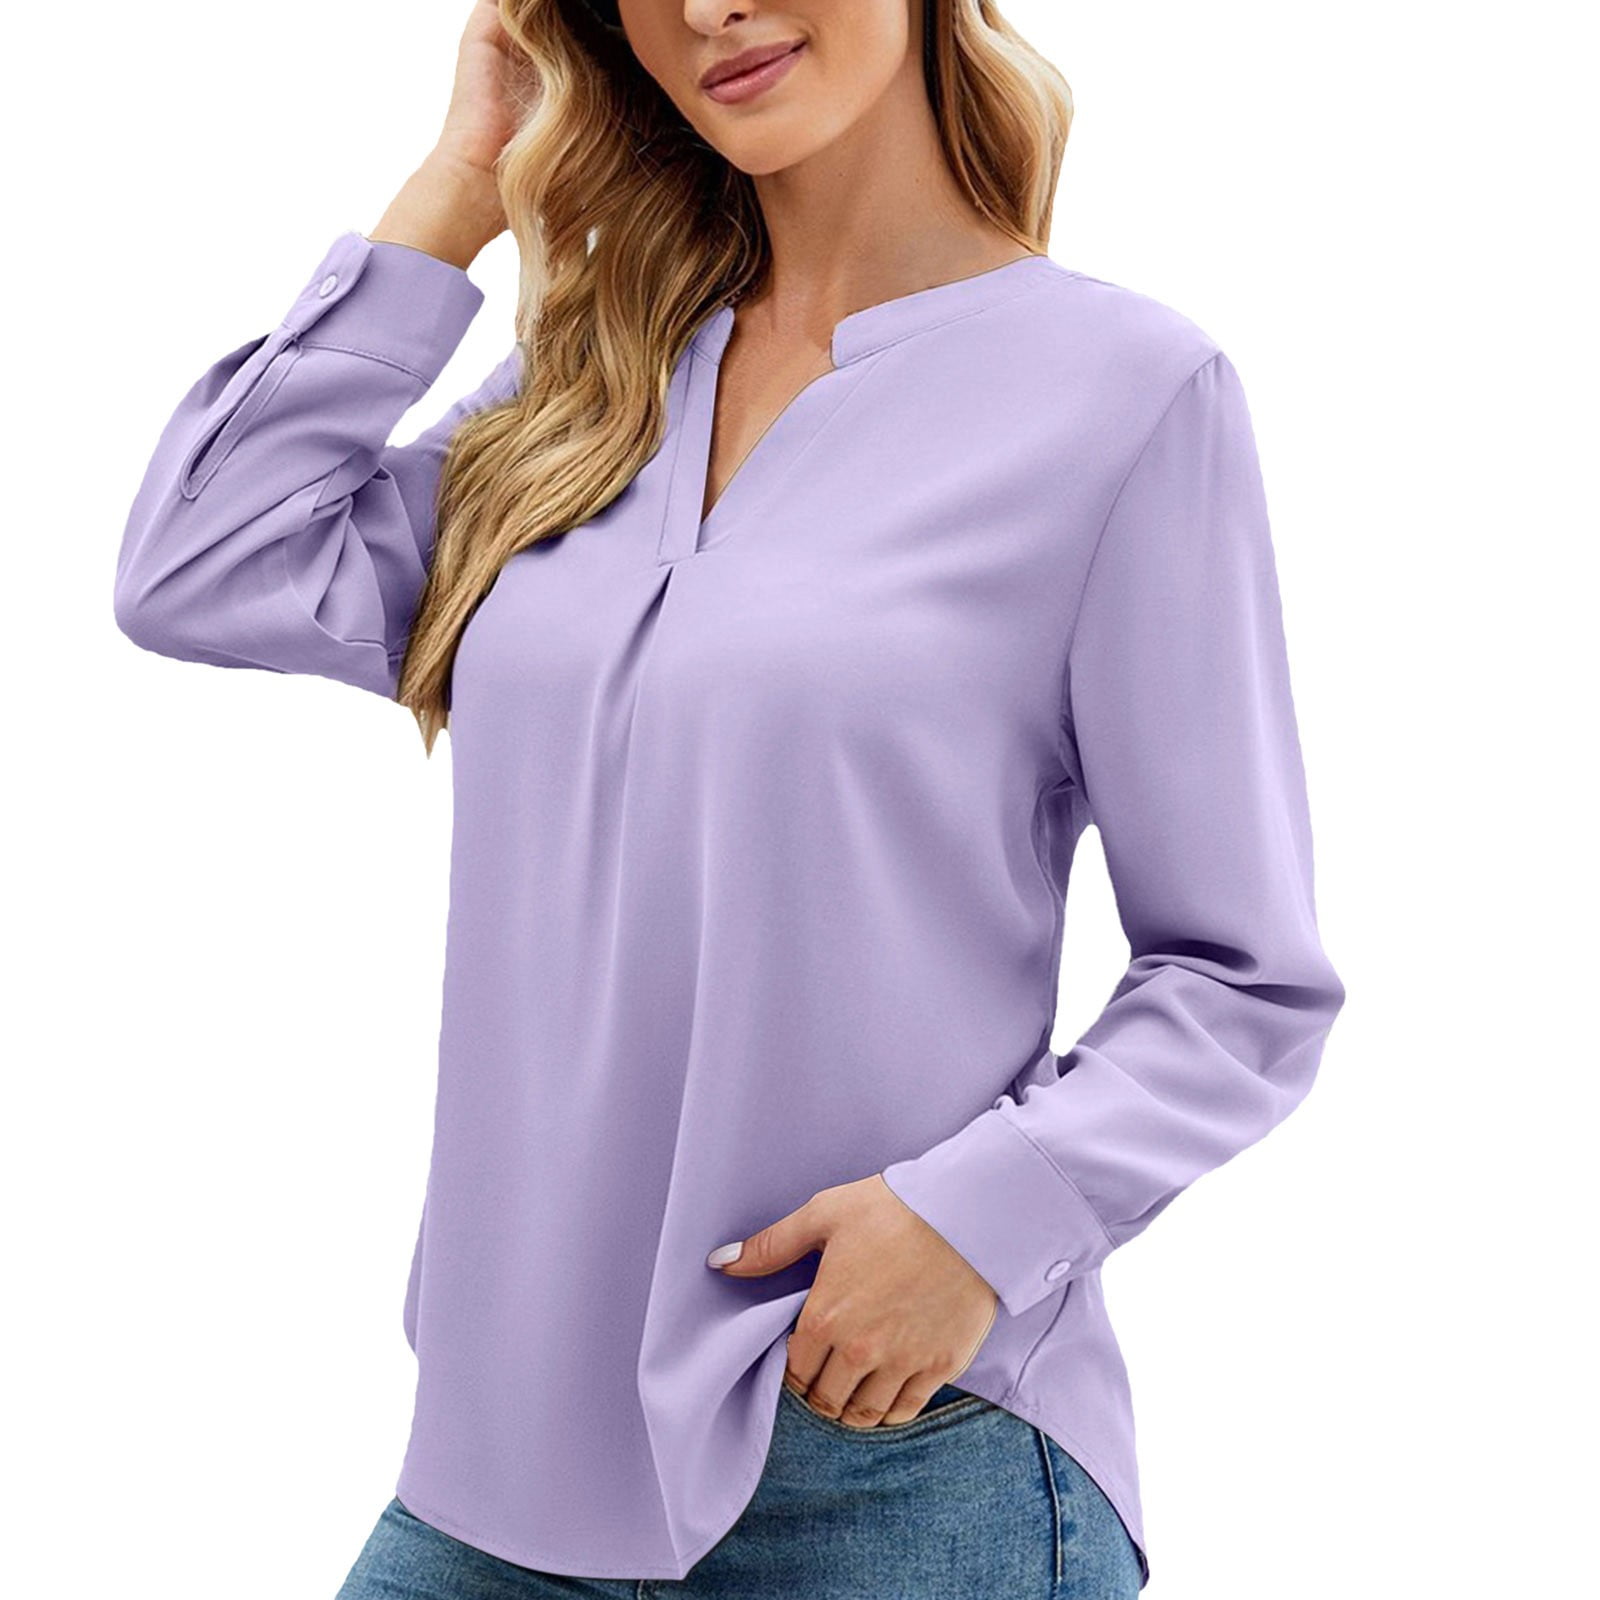 DESKABLY Overstock Items Clearance All Prime Sweatshirt for Women V Neck  Button Down Casual Long Sleeve Shirts for Women